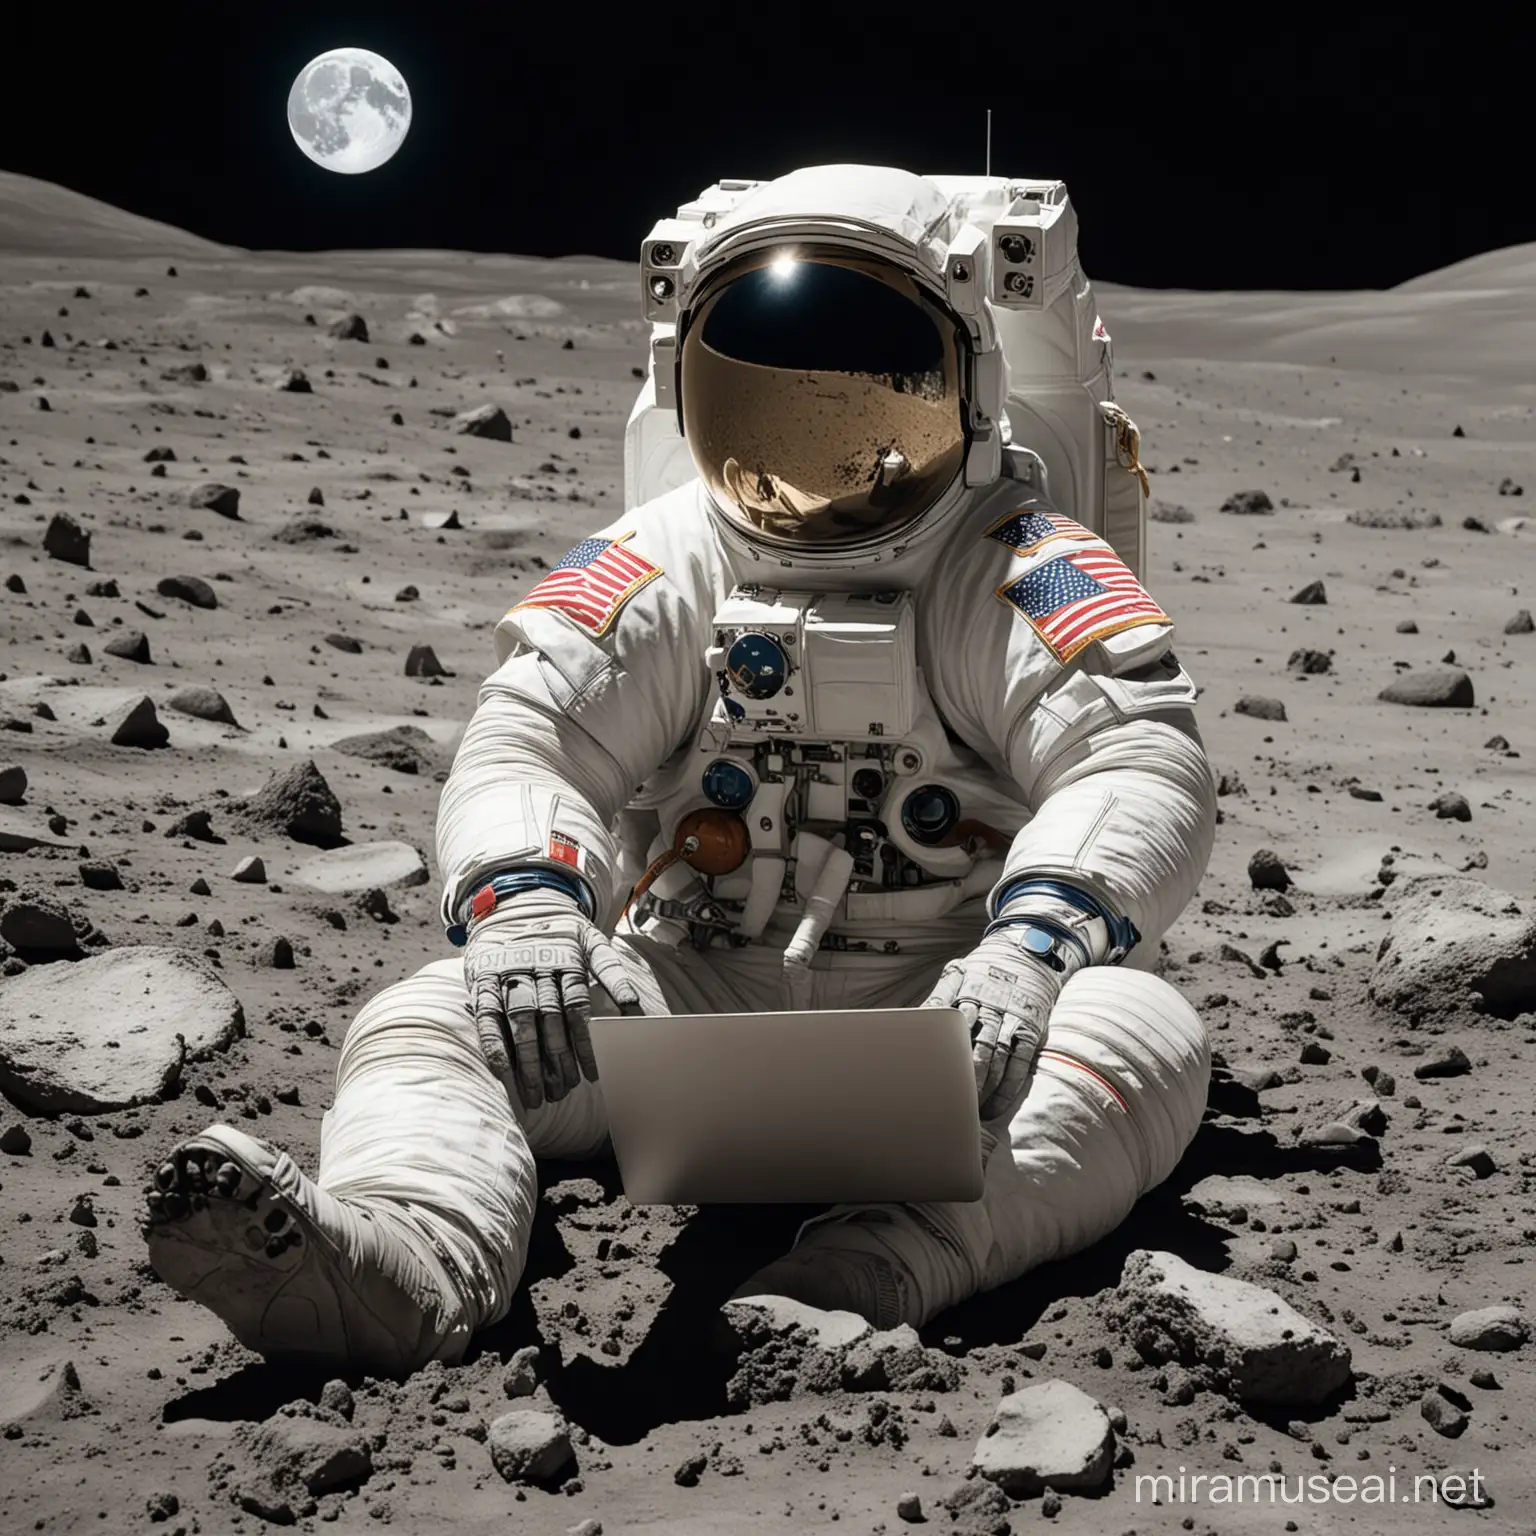 An astronaut in a spacesuit sits on the moon with a laptop